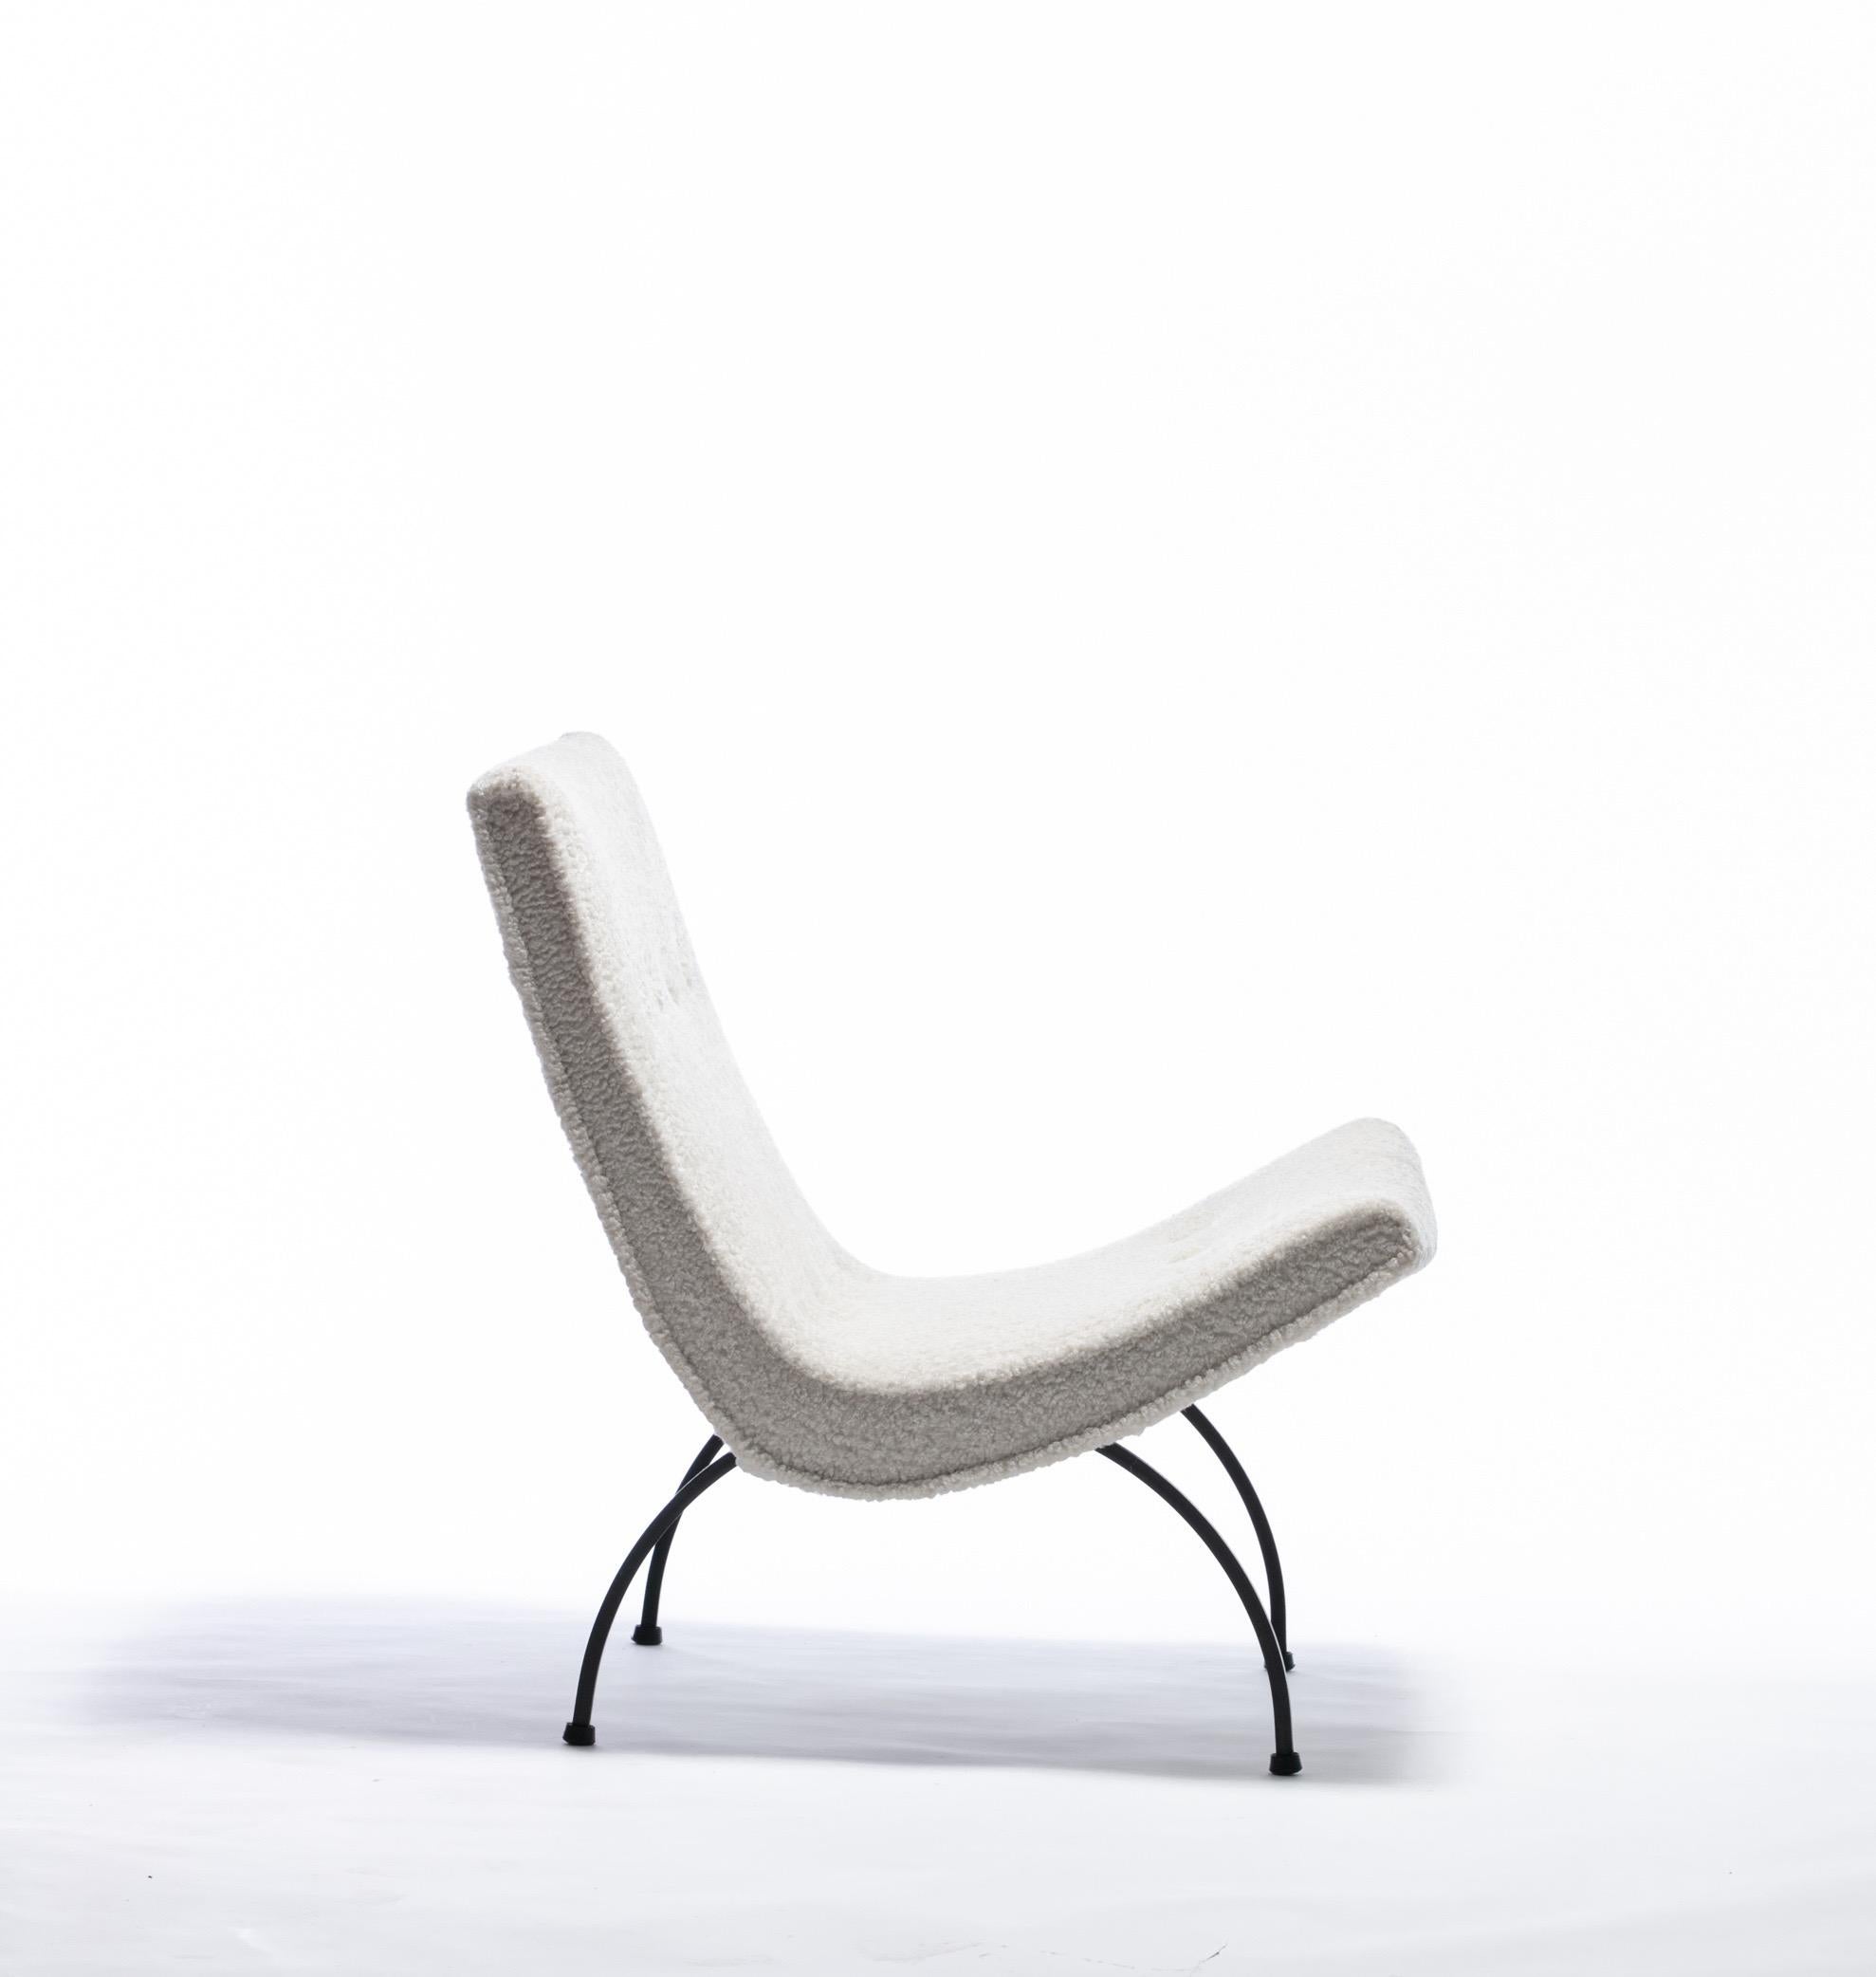 This Milo Baughman Scoop chair is luxuriously upholstered in ivory Shearling upholstery which adds a wonderful texture to the Minimalist profile. Elegant and chic in its simplicity, the iron legs are substantial yet wispy as a line drawing. The